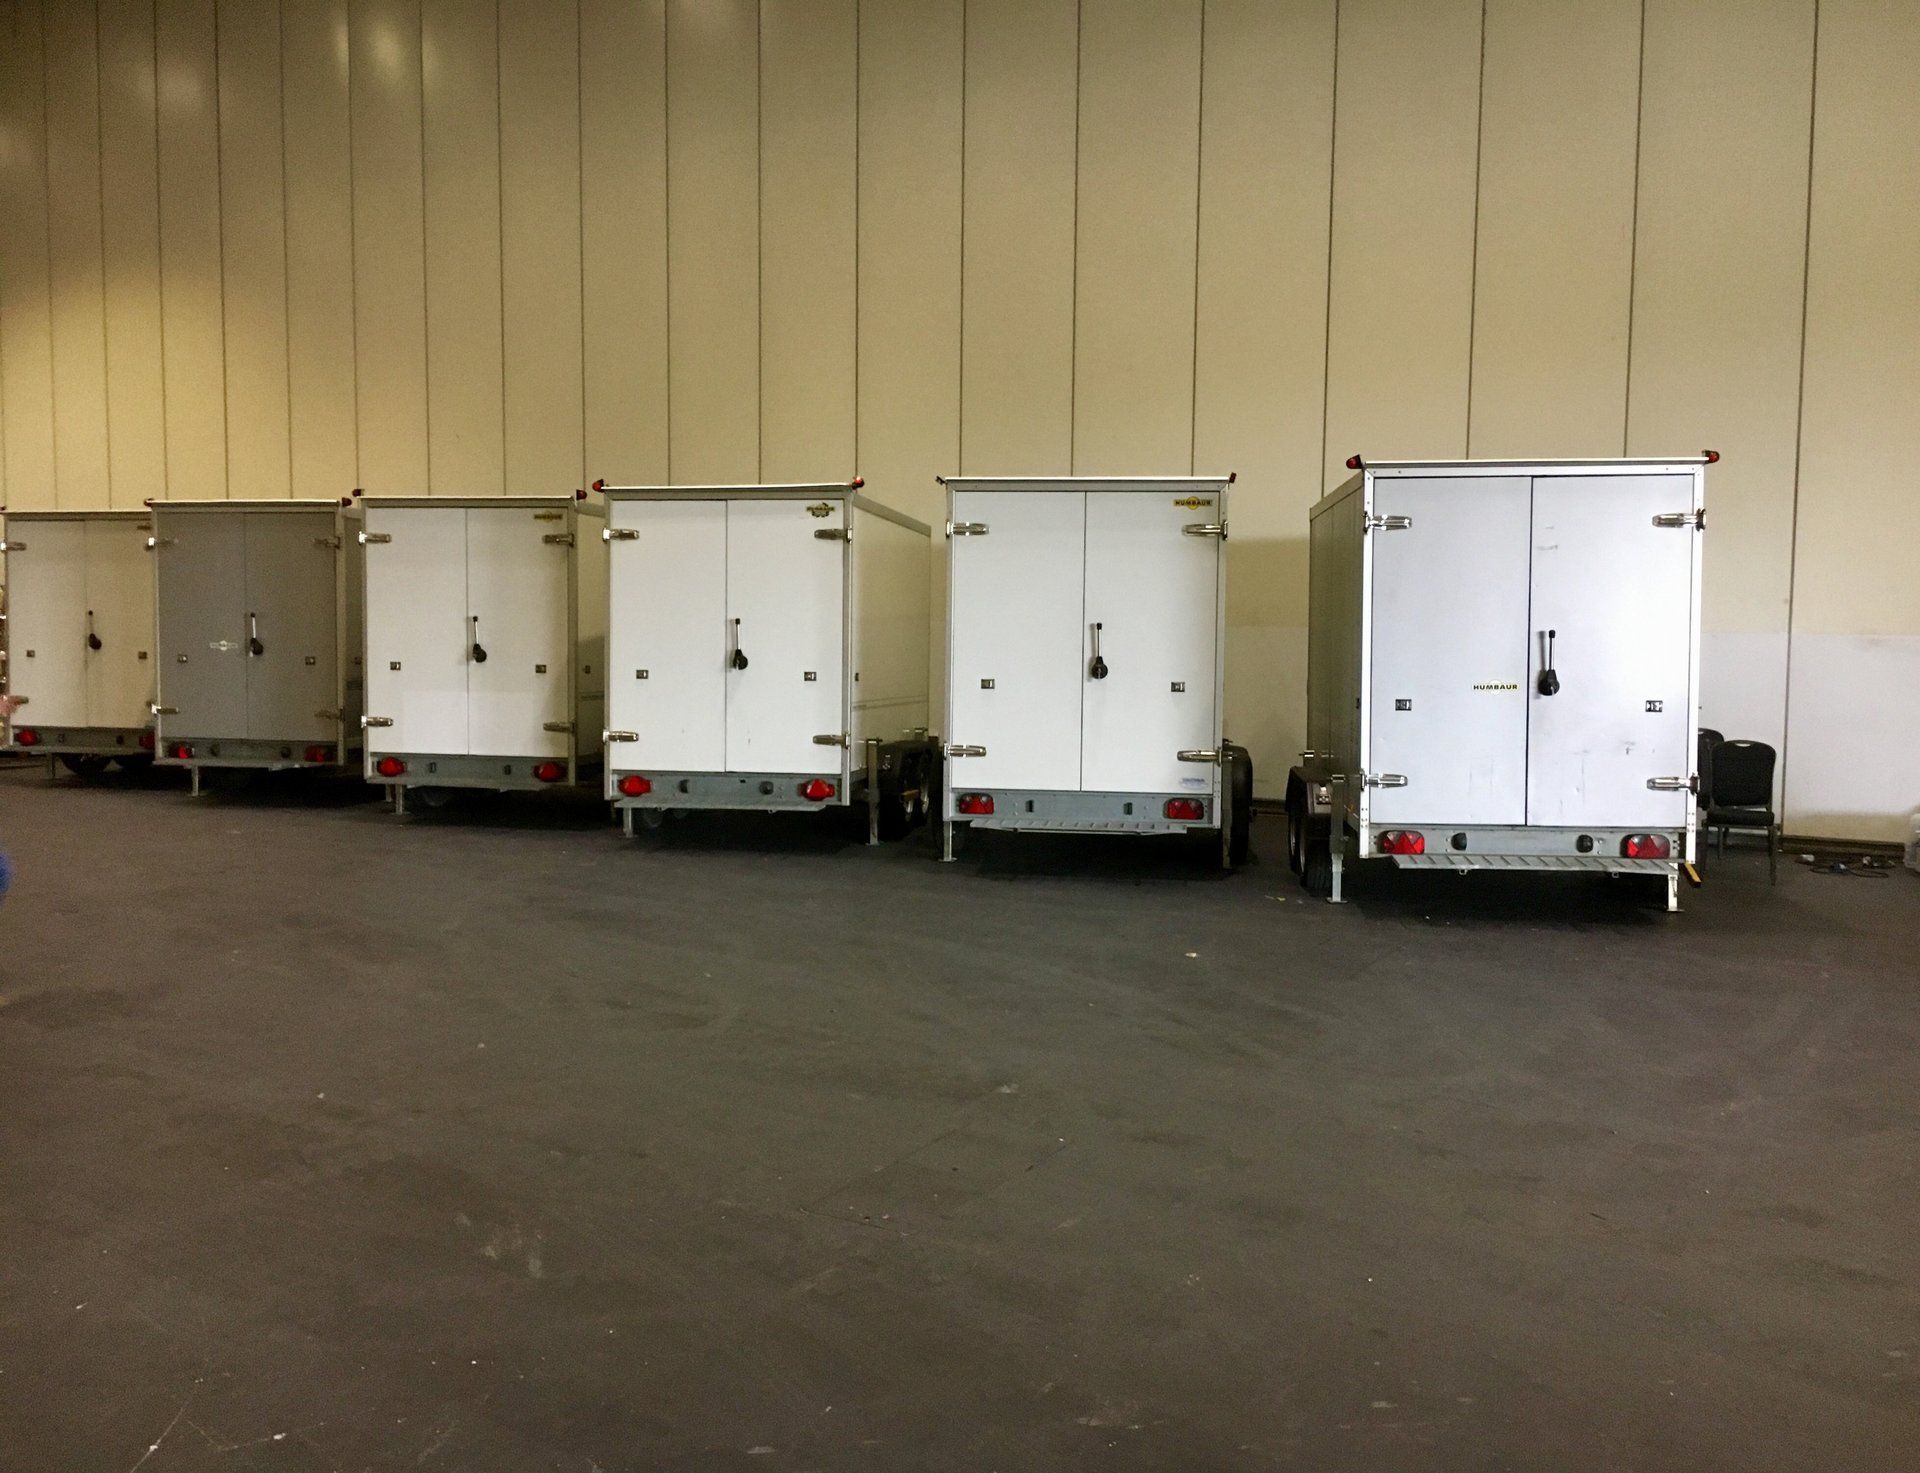 Six Fridge Trailers at World Wine Competition Excel 2017